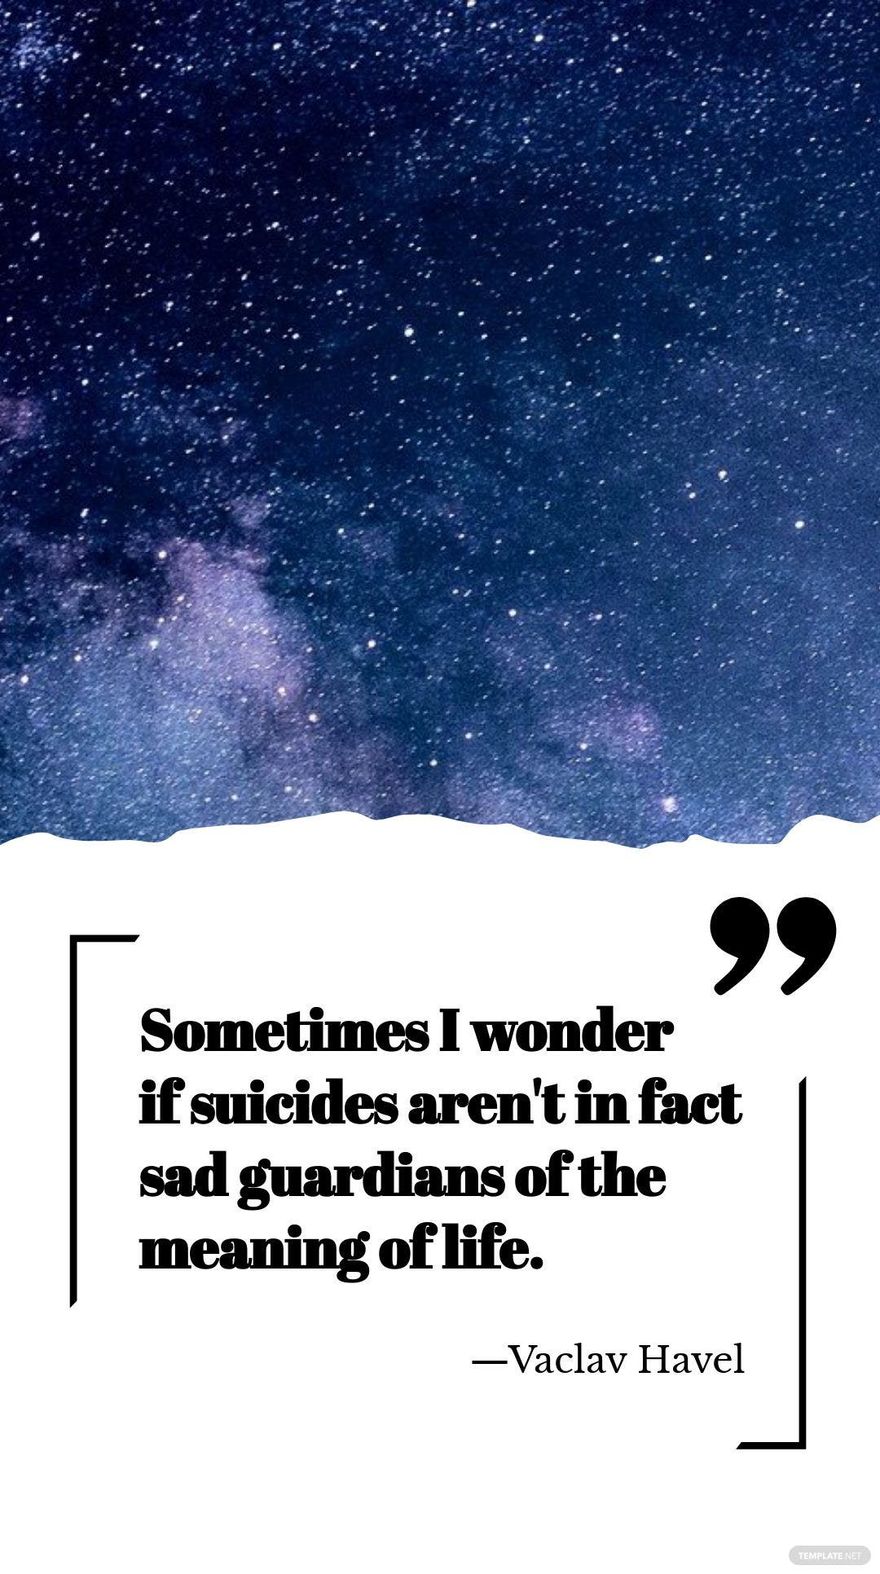 Vaclav Havel - Sometimes I wonder if suicides aren't in fact sad guardians of the meaning of life.